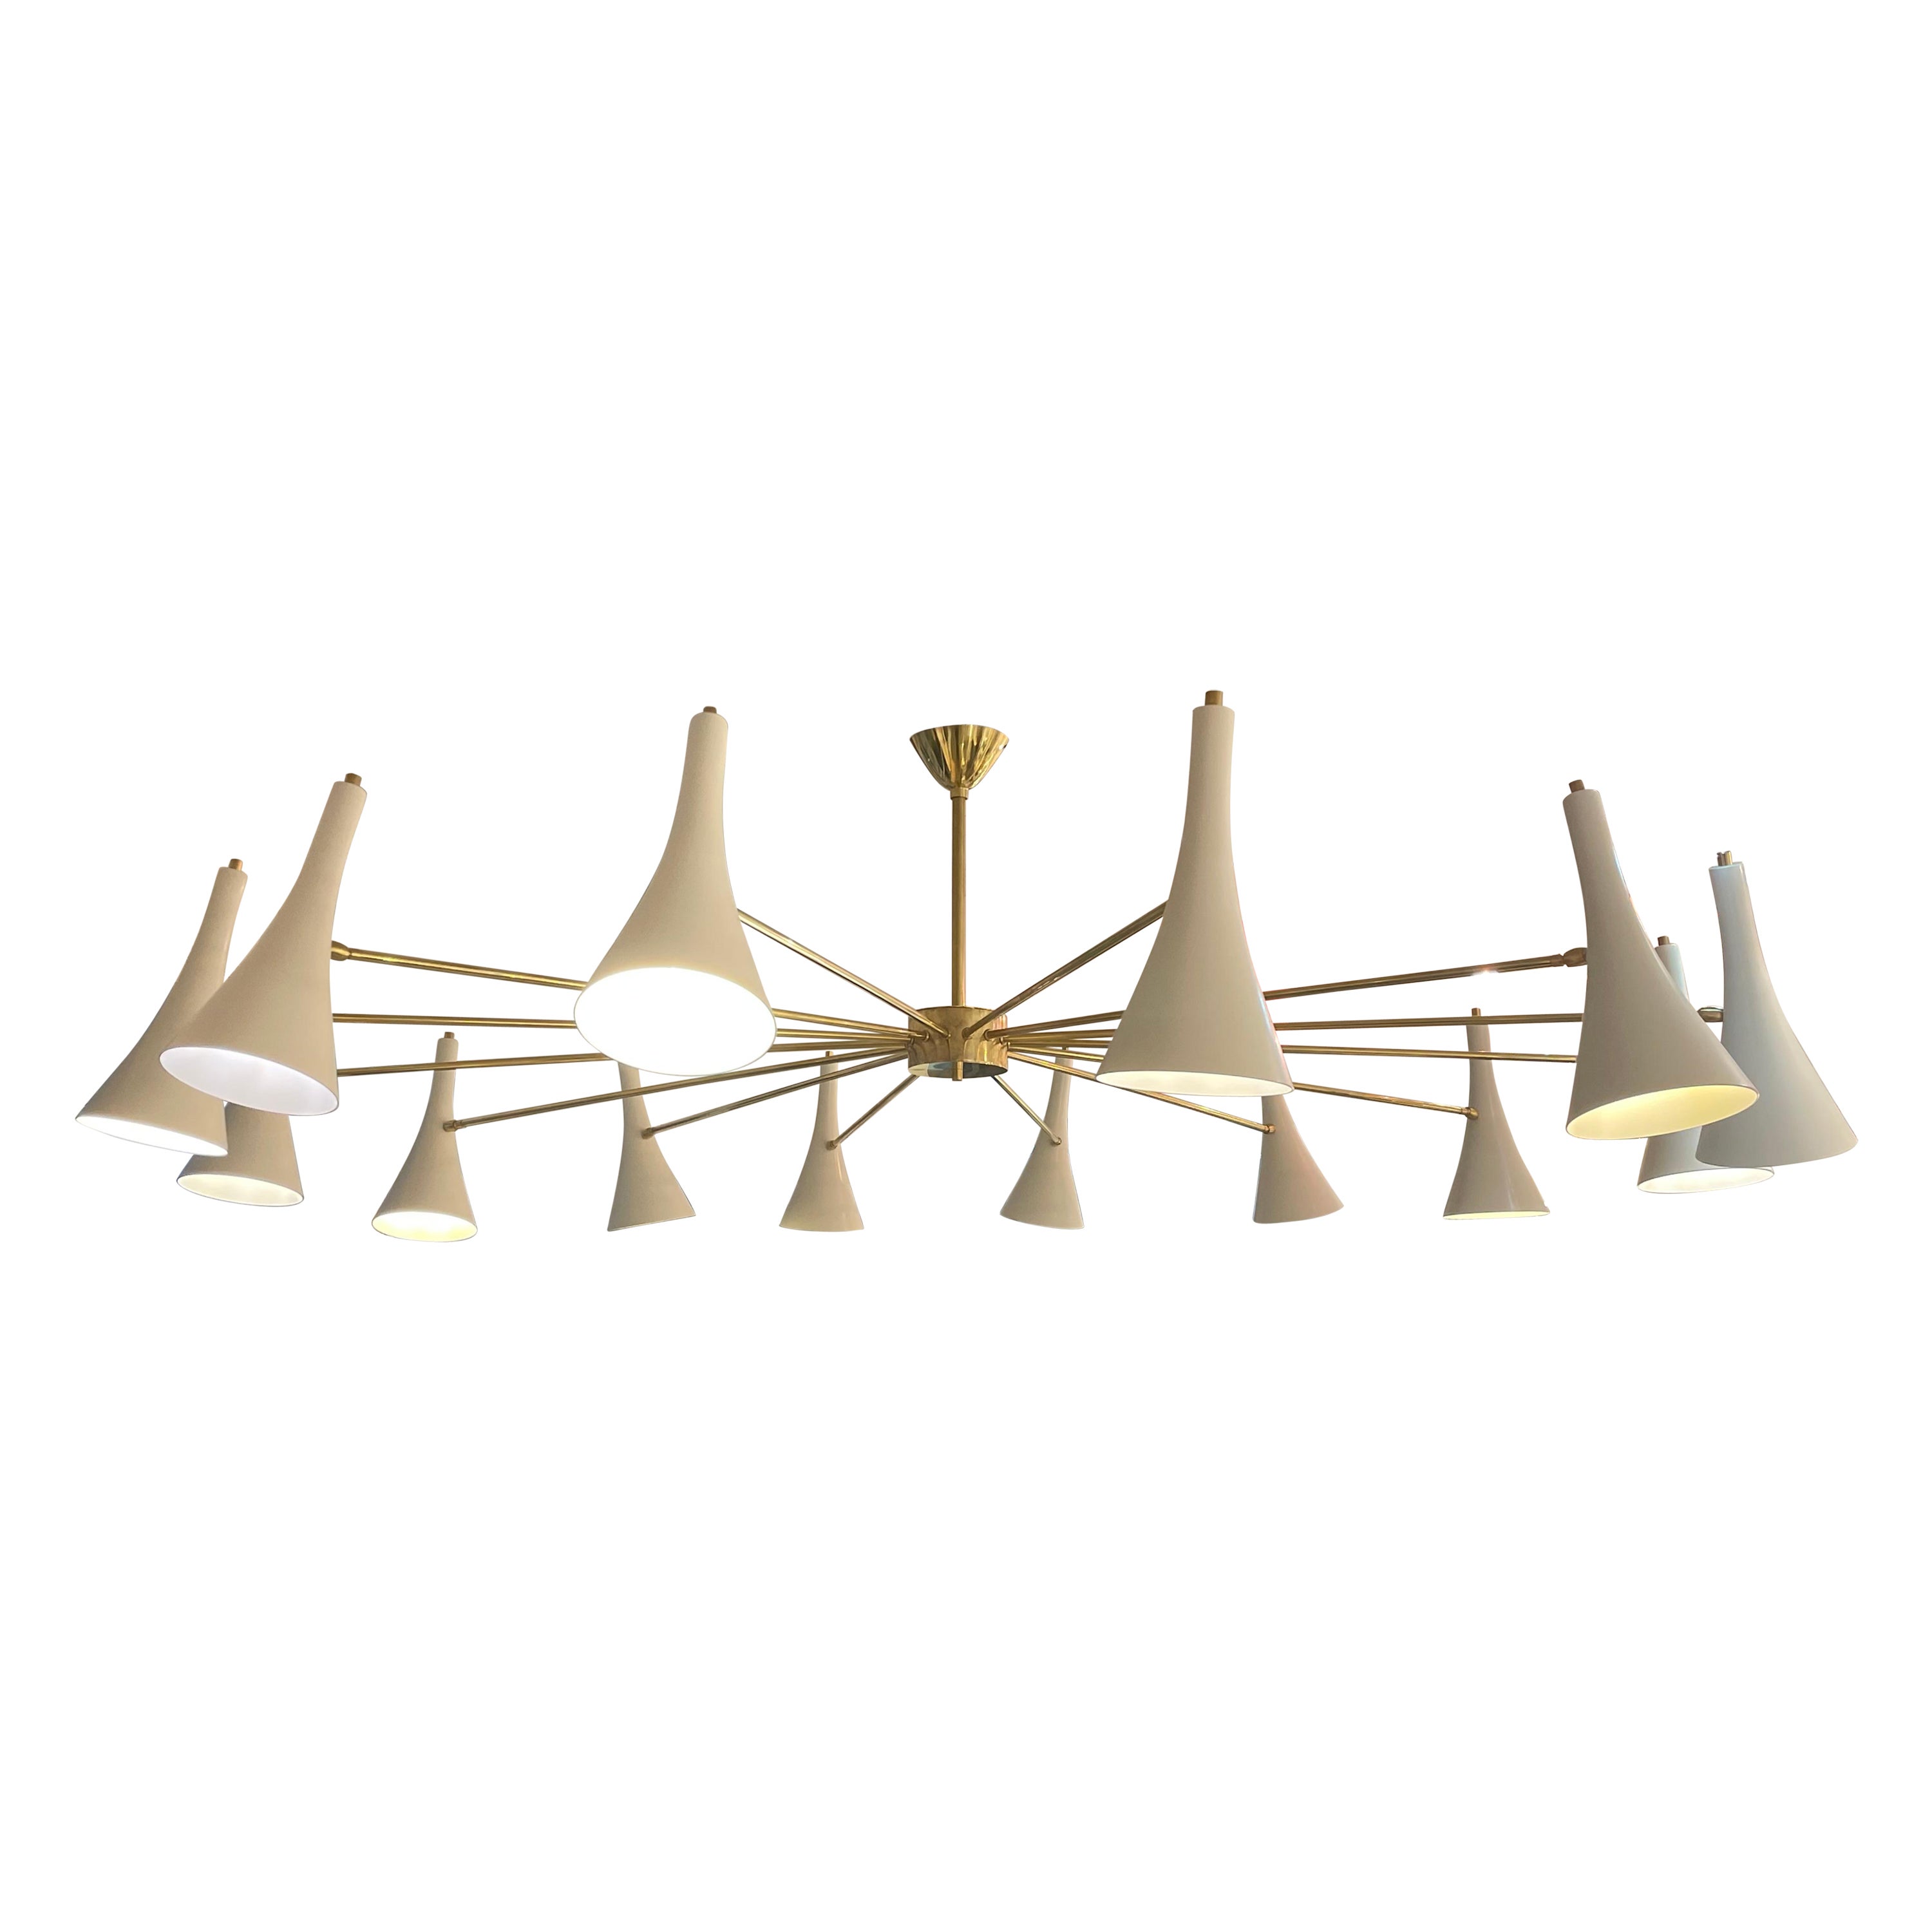 Italian Modernist Chandelier in Brass with 14 Arms, circa 1970